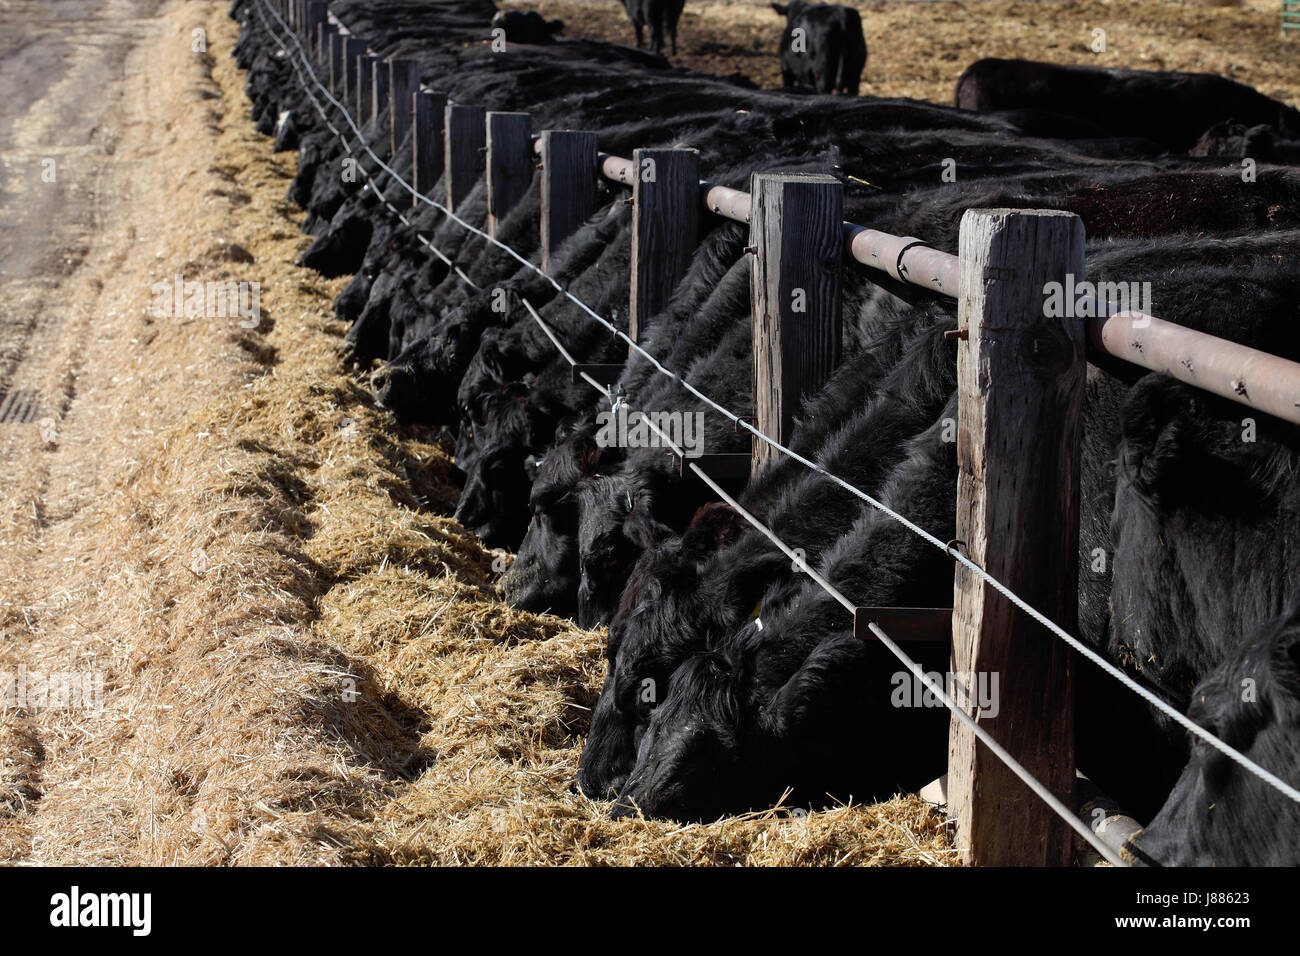 Black angus cattle feeding in a feedlot Stock Photo